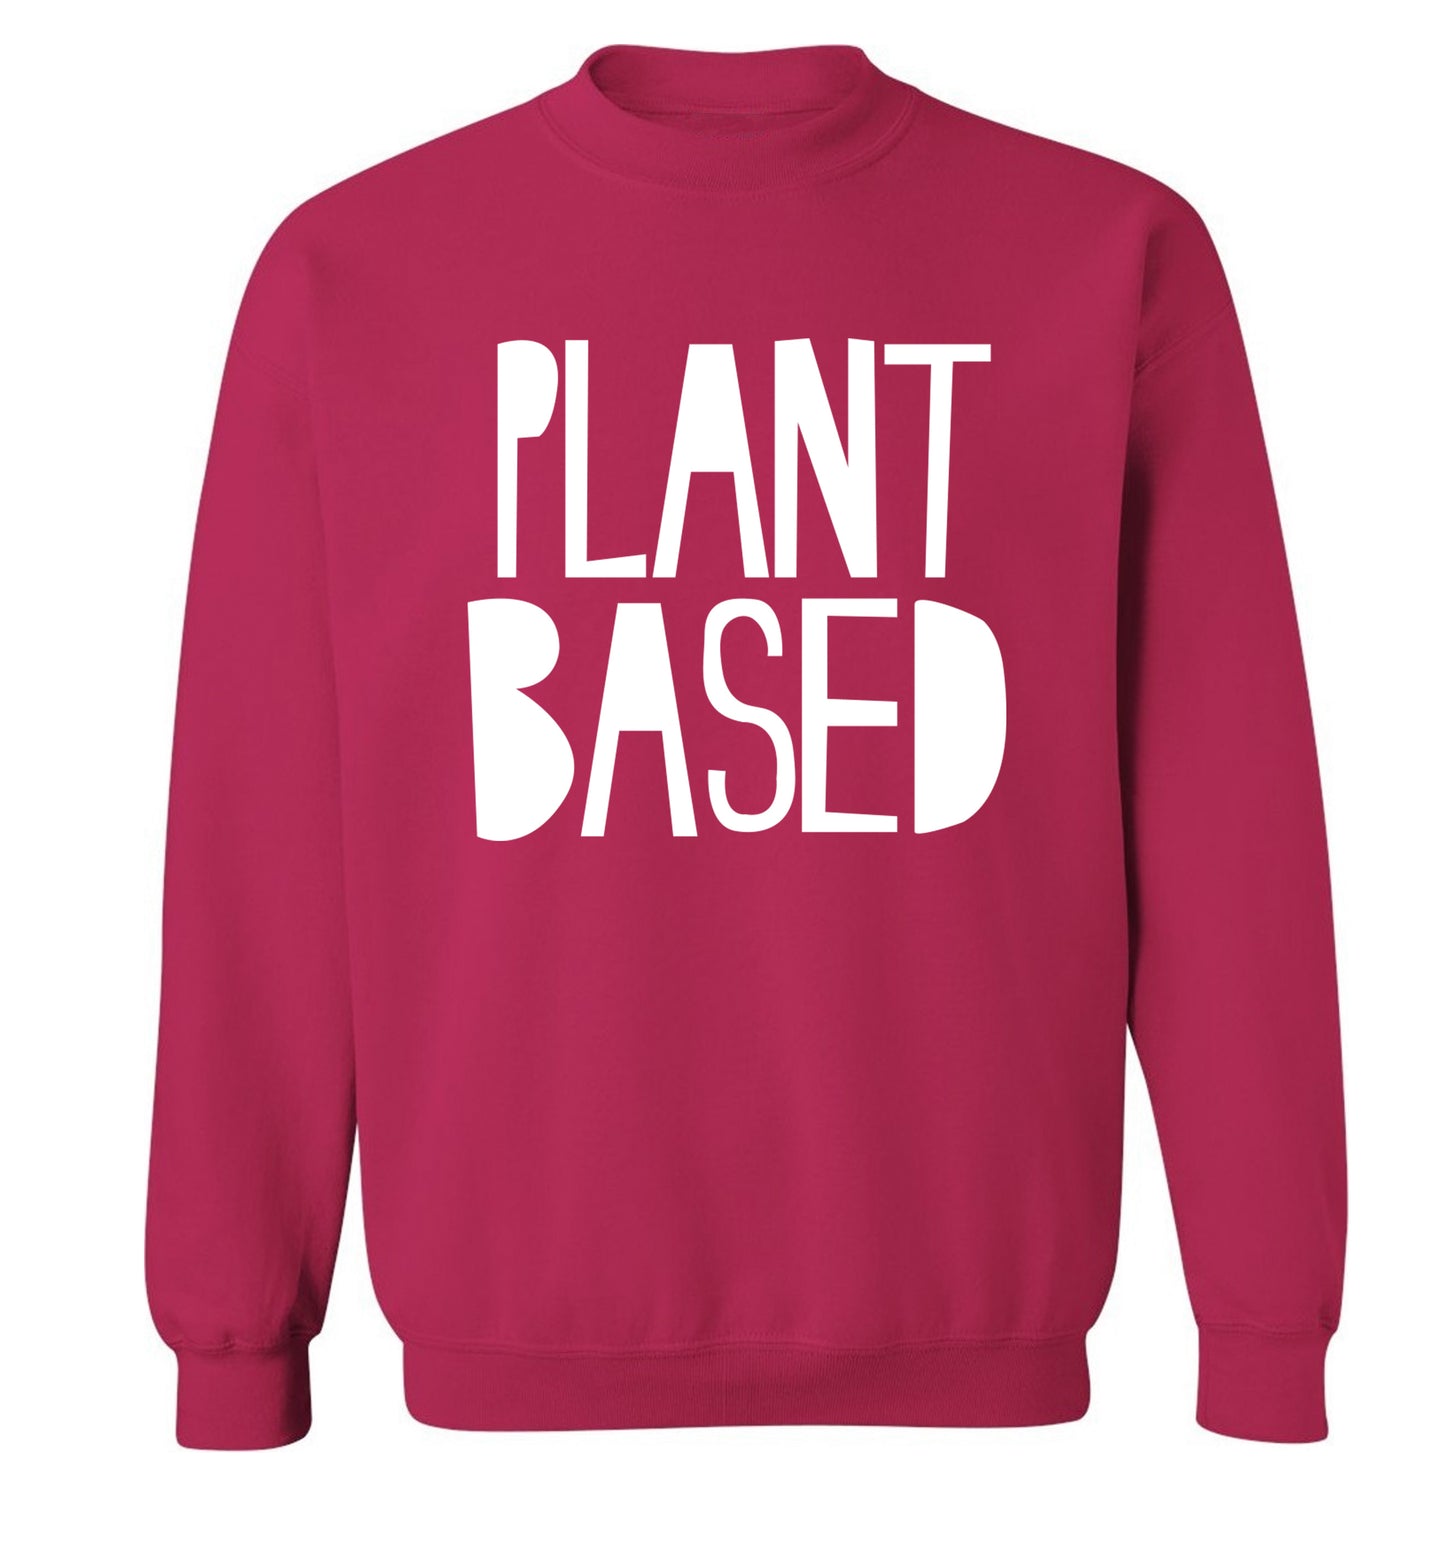 Plant Based Adult's unisex pink Sweater 2XL